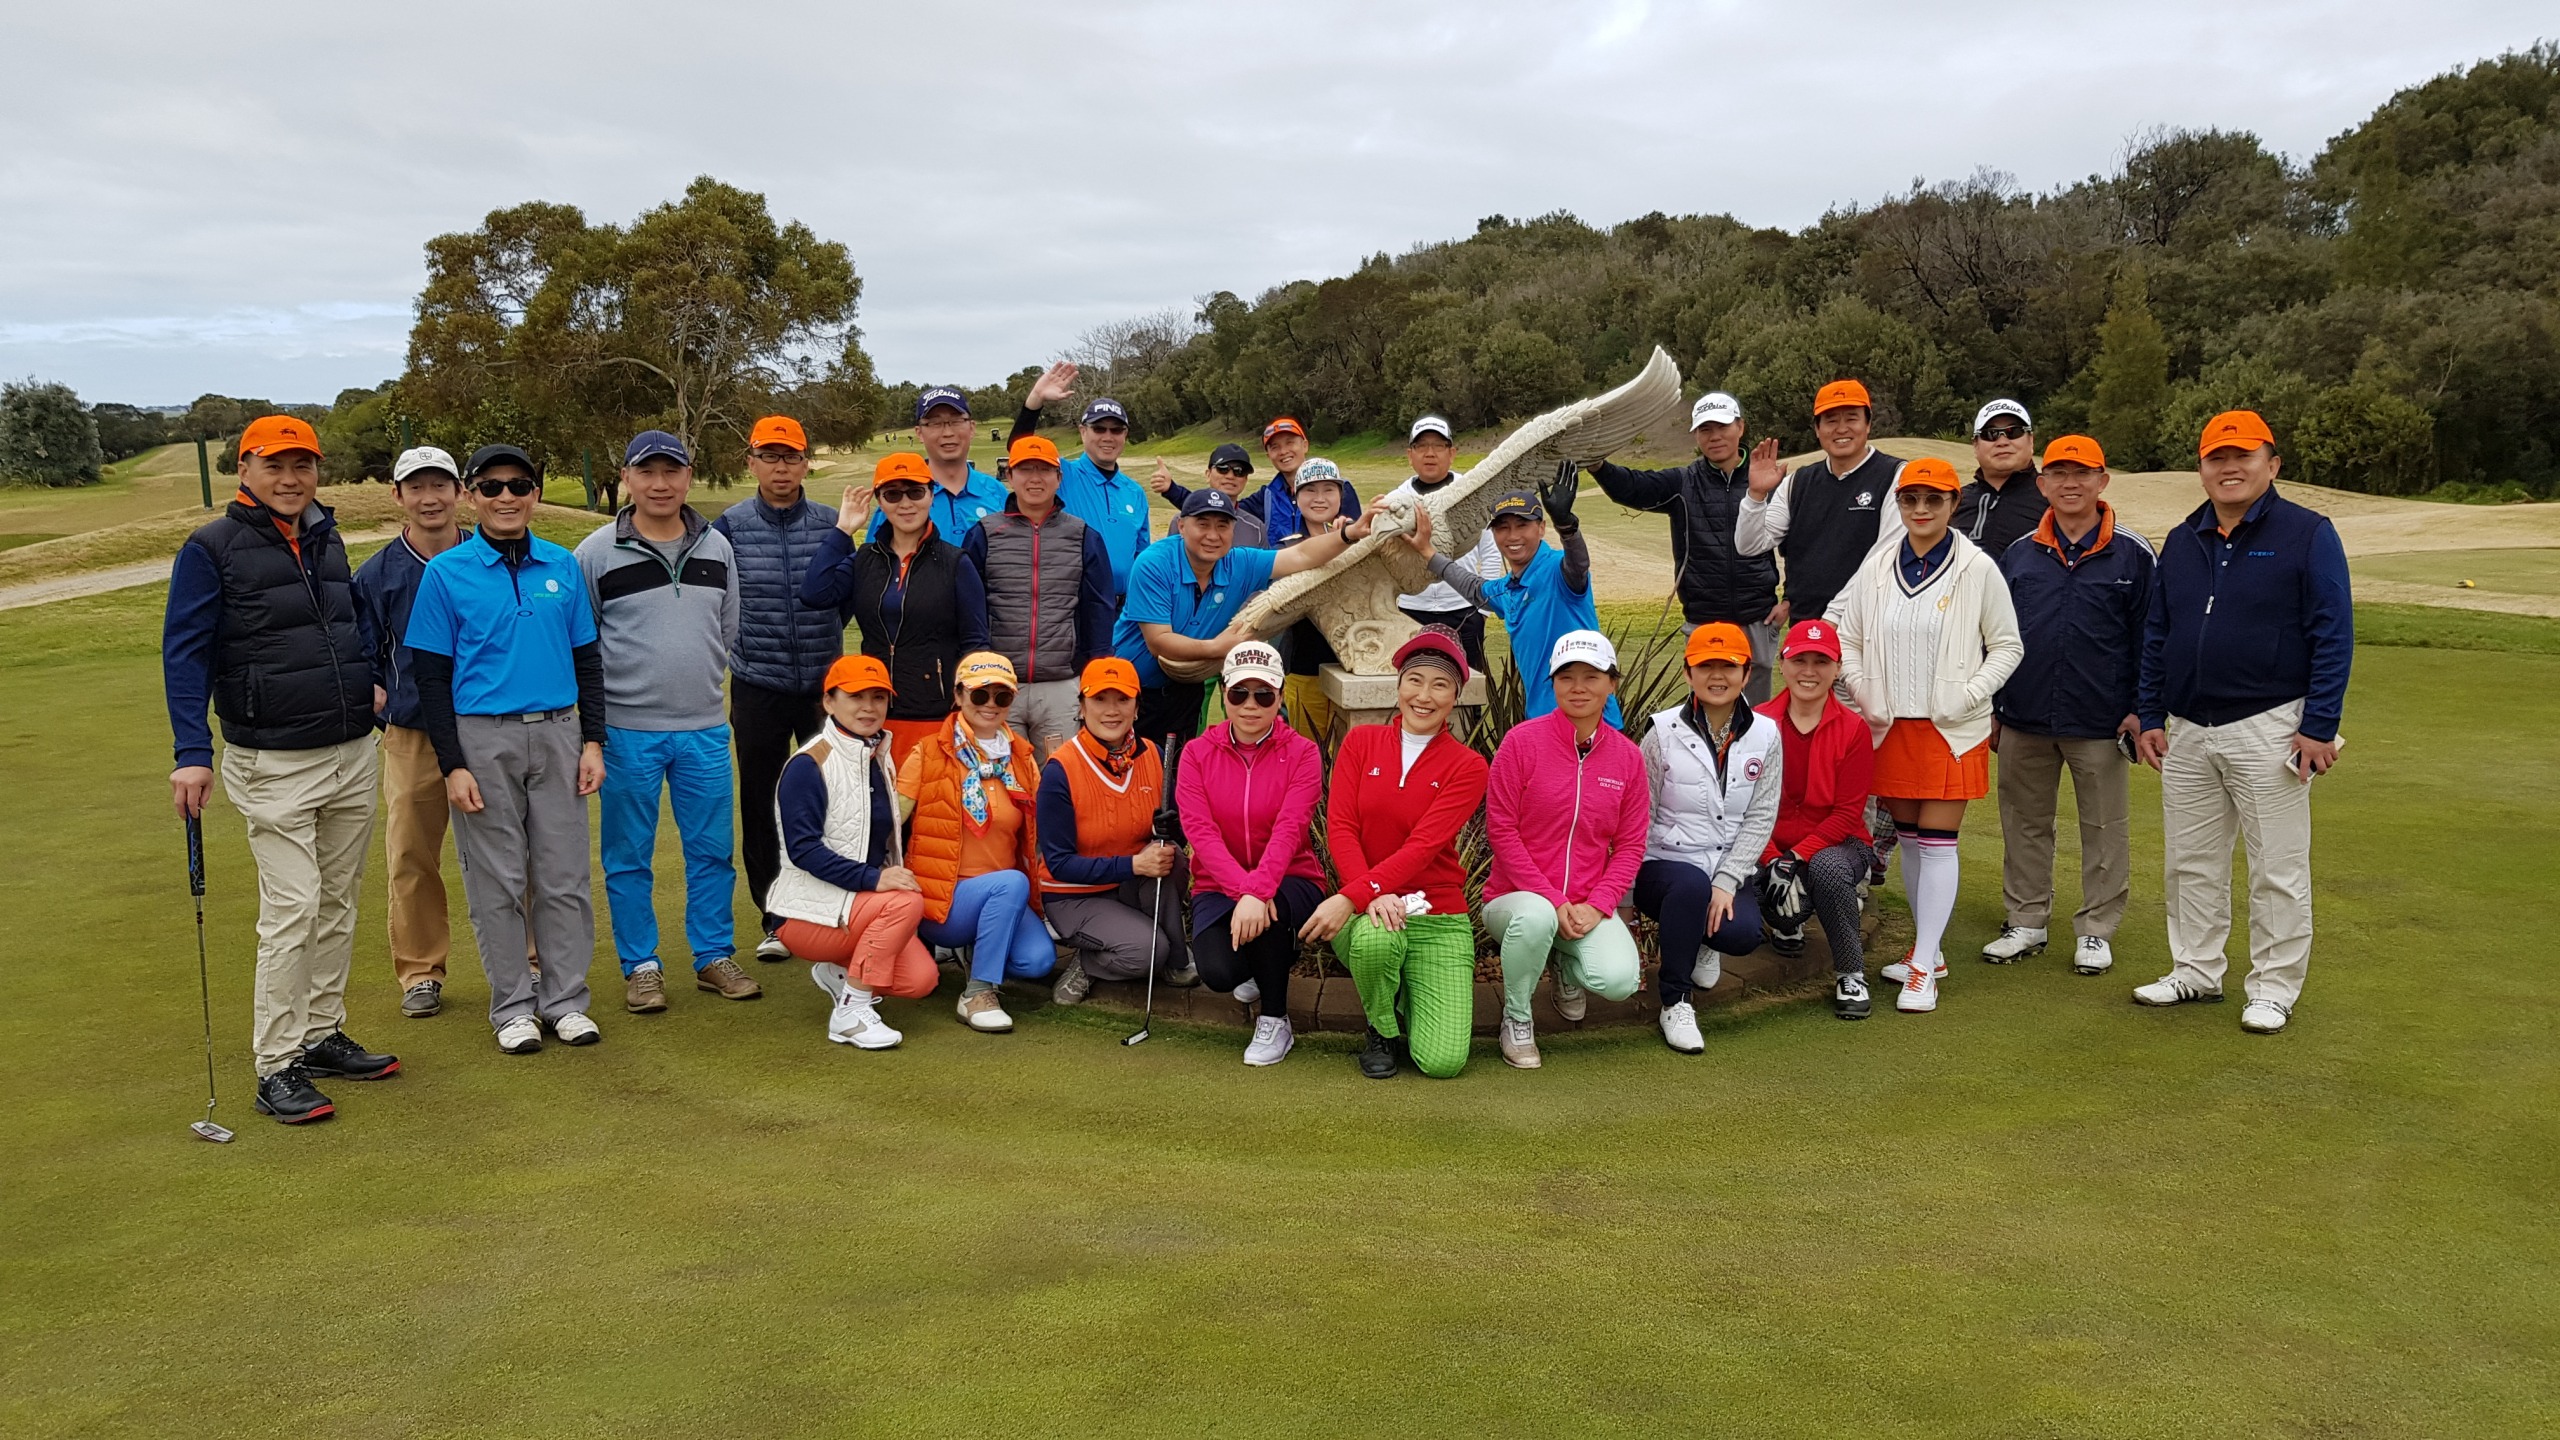 Group of golfers standing in front of the large eagle at Eagle Ridge Golf Course on the Mornington Peninsula